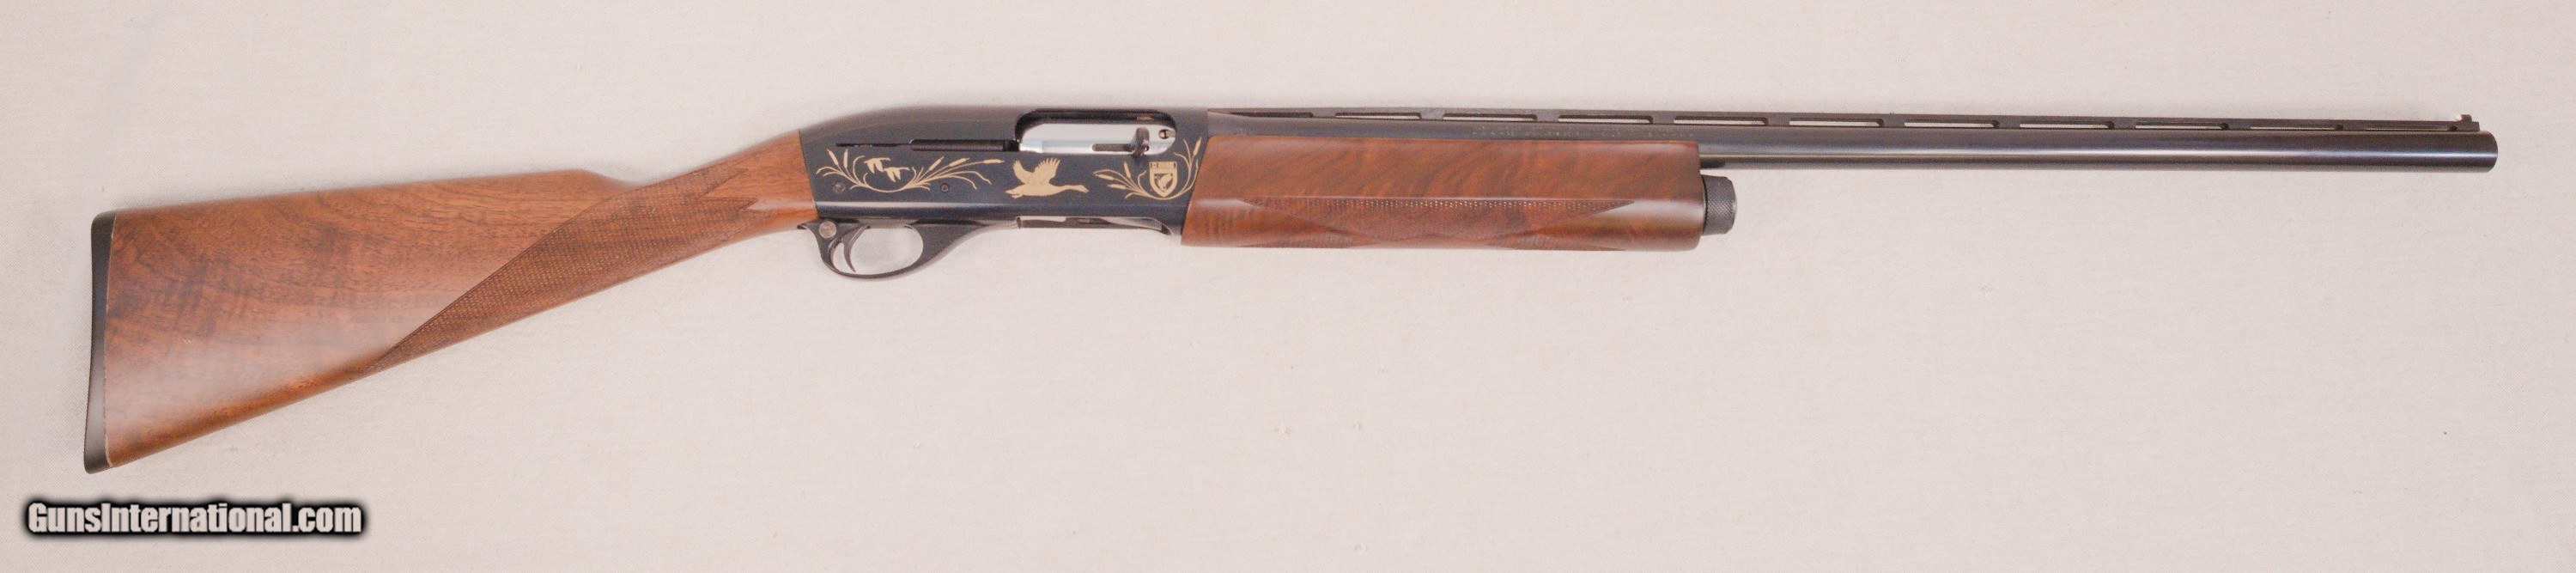 Remington Model 1100 Special Field Ducks Unlimited Commemorative English Style Straight Grip 8185